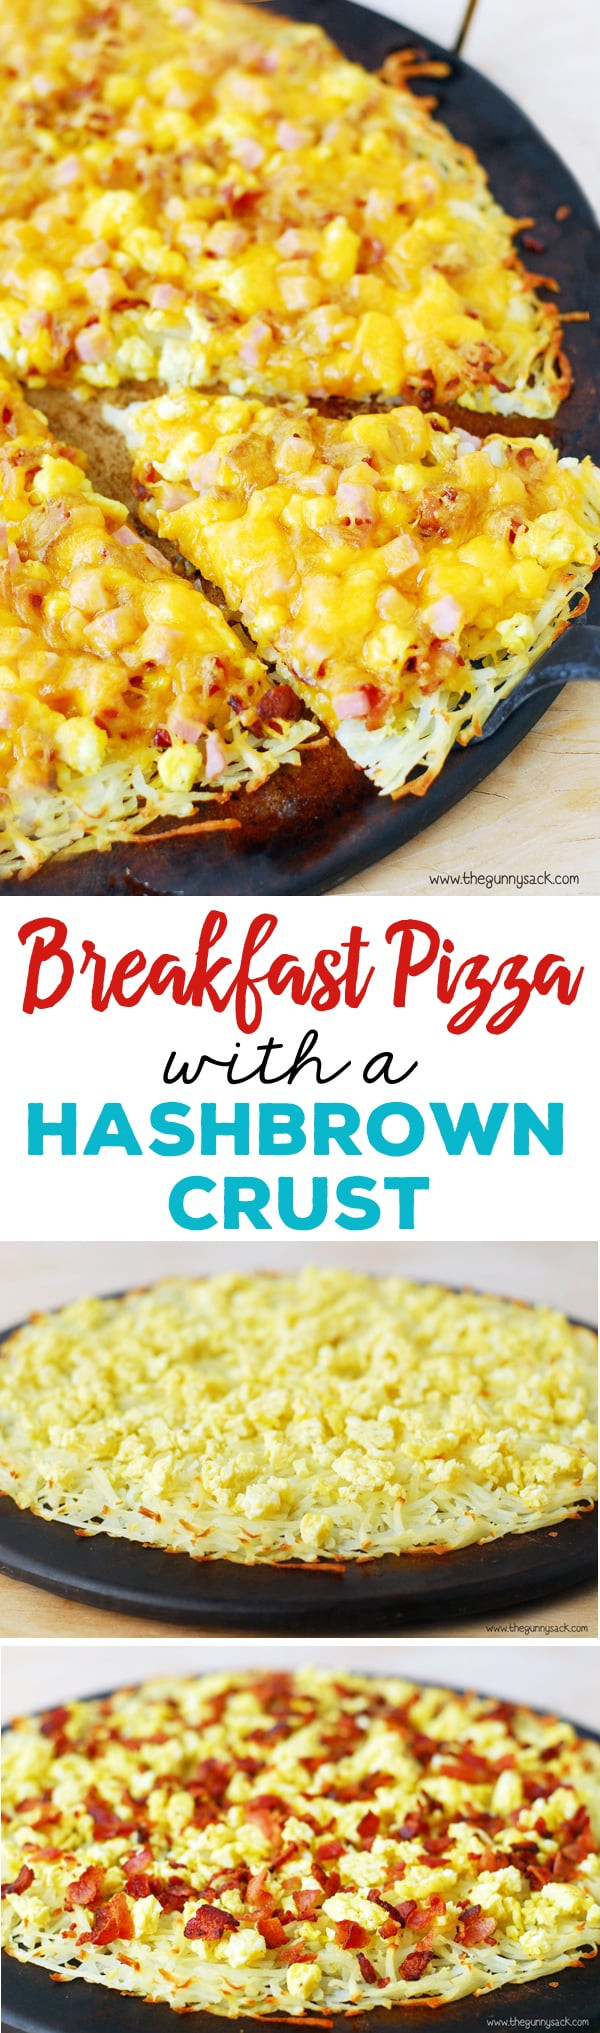 Hash Brown Breakfast Pizza
 Breakfast Pizza with Hash Brown Crust The Gunny Sack